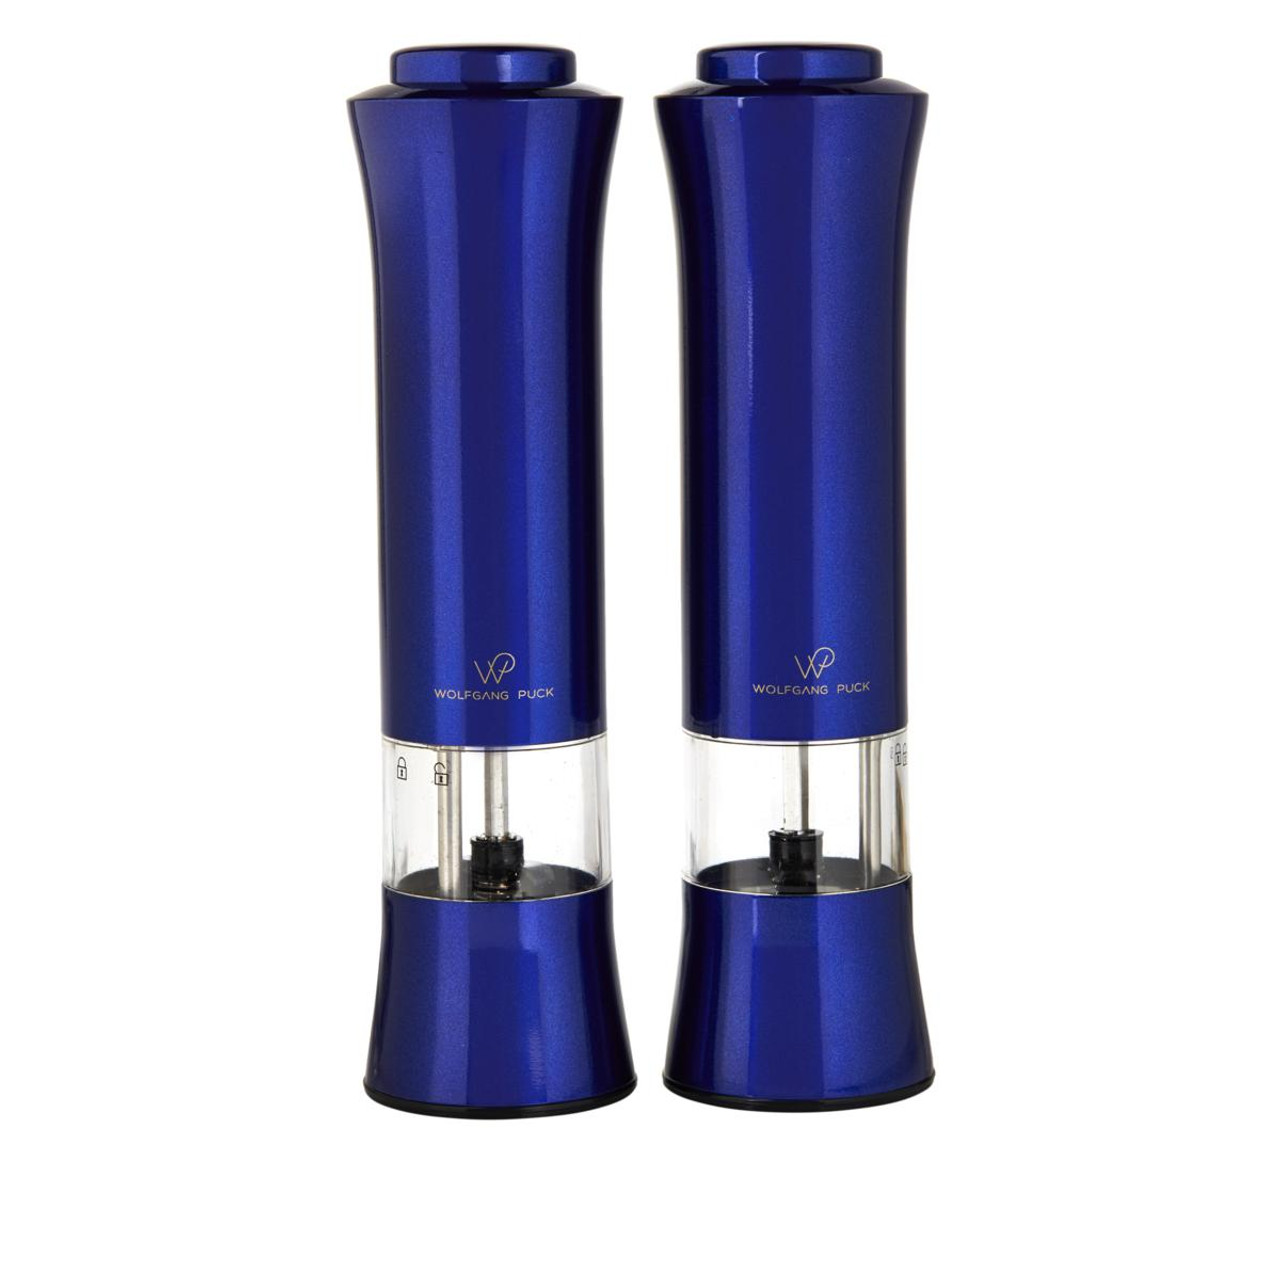 Wolfgang Puck 2-pack One-button Touch Spice Mills Refurbished